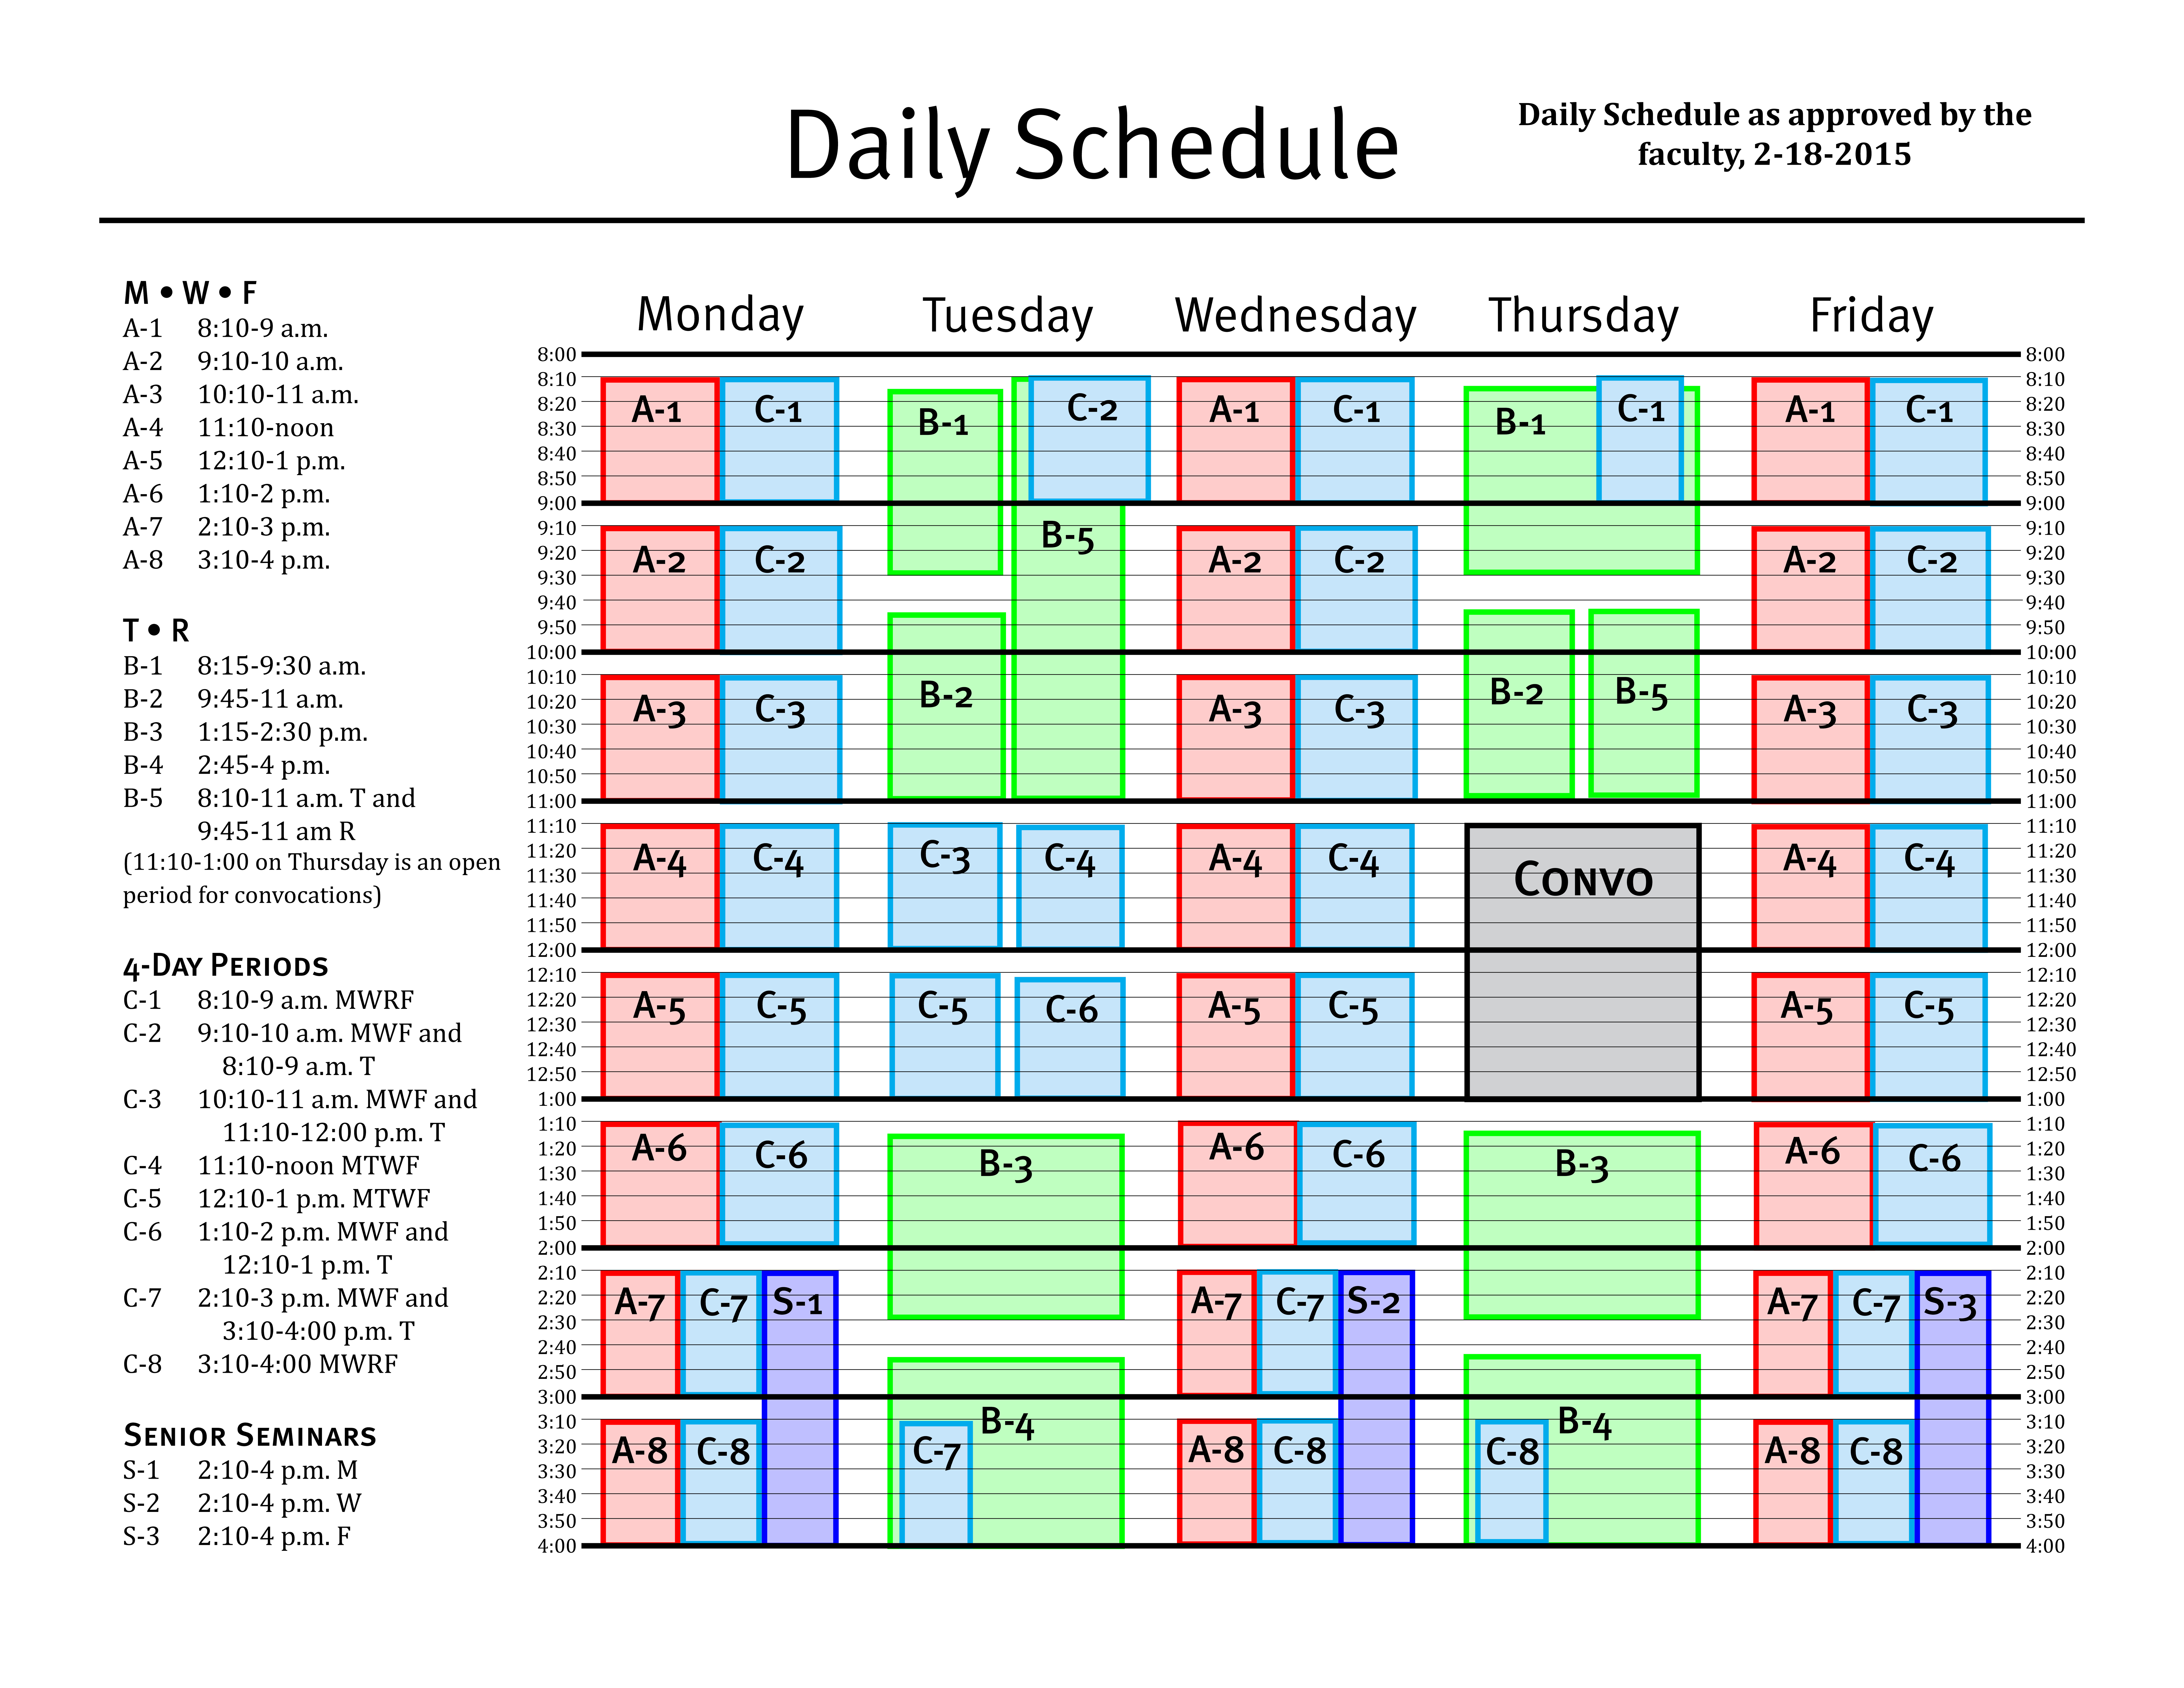 Daily Time Table Chart For Study